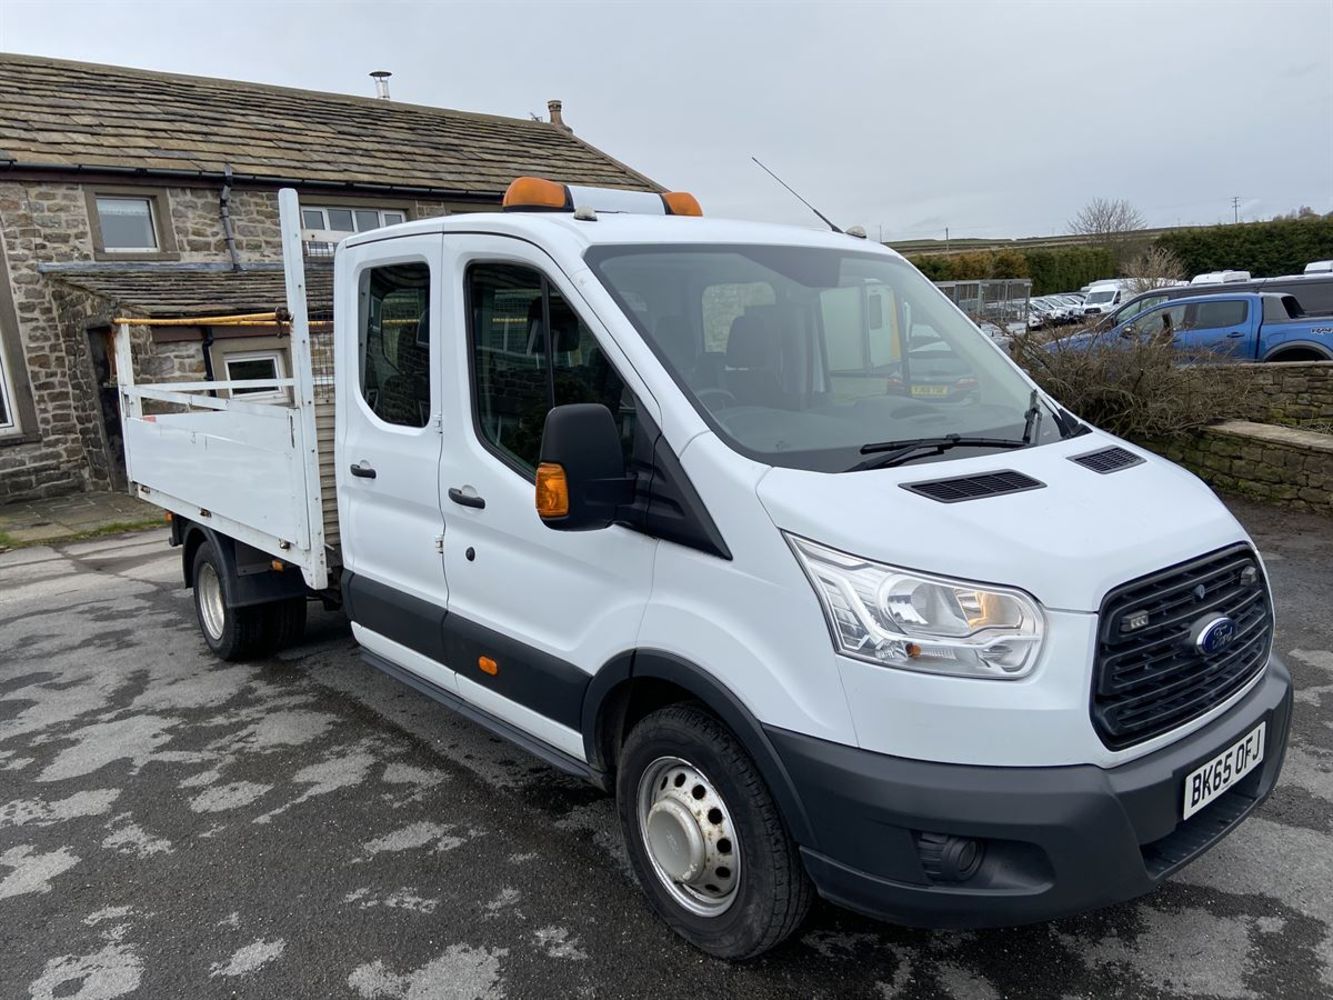 Commercial Vans, Pick Up Trucks, Commercial Vehicles and More due to Stock Clearance and Private Sale